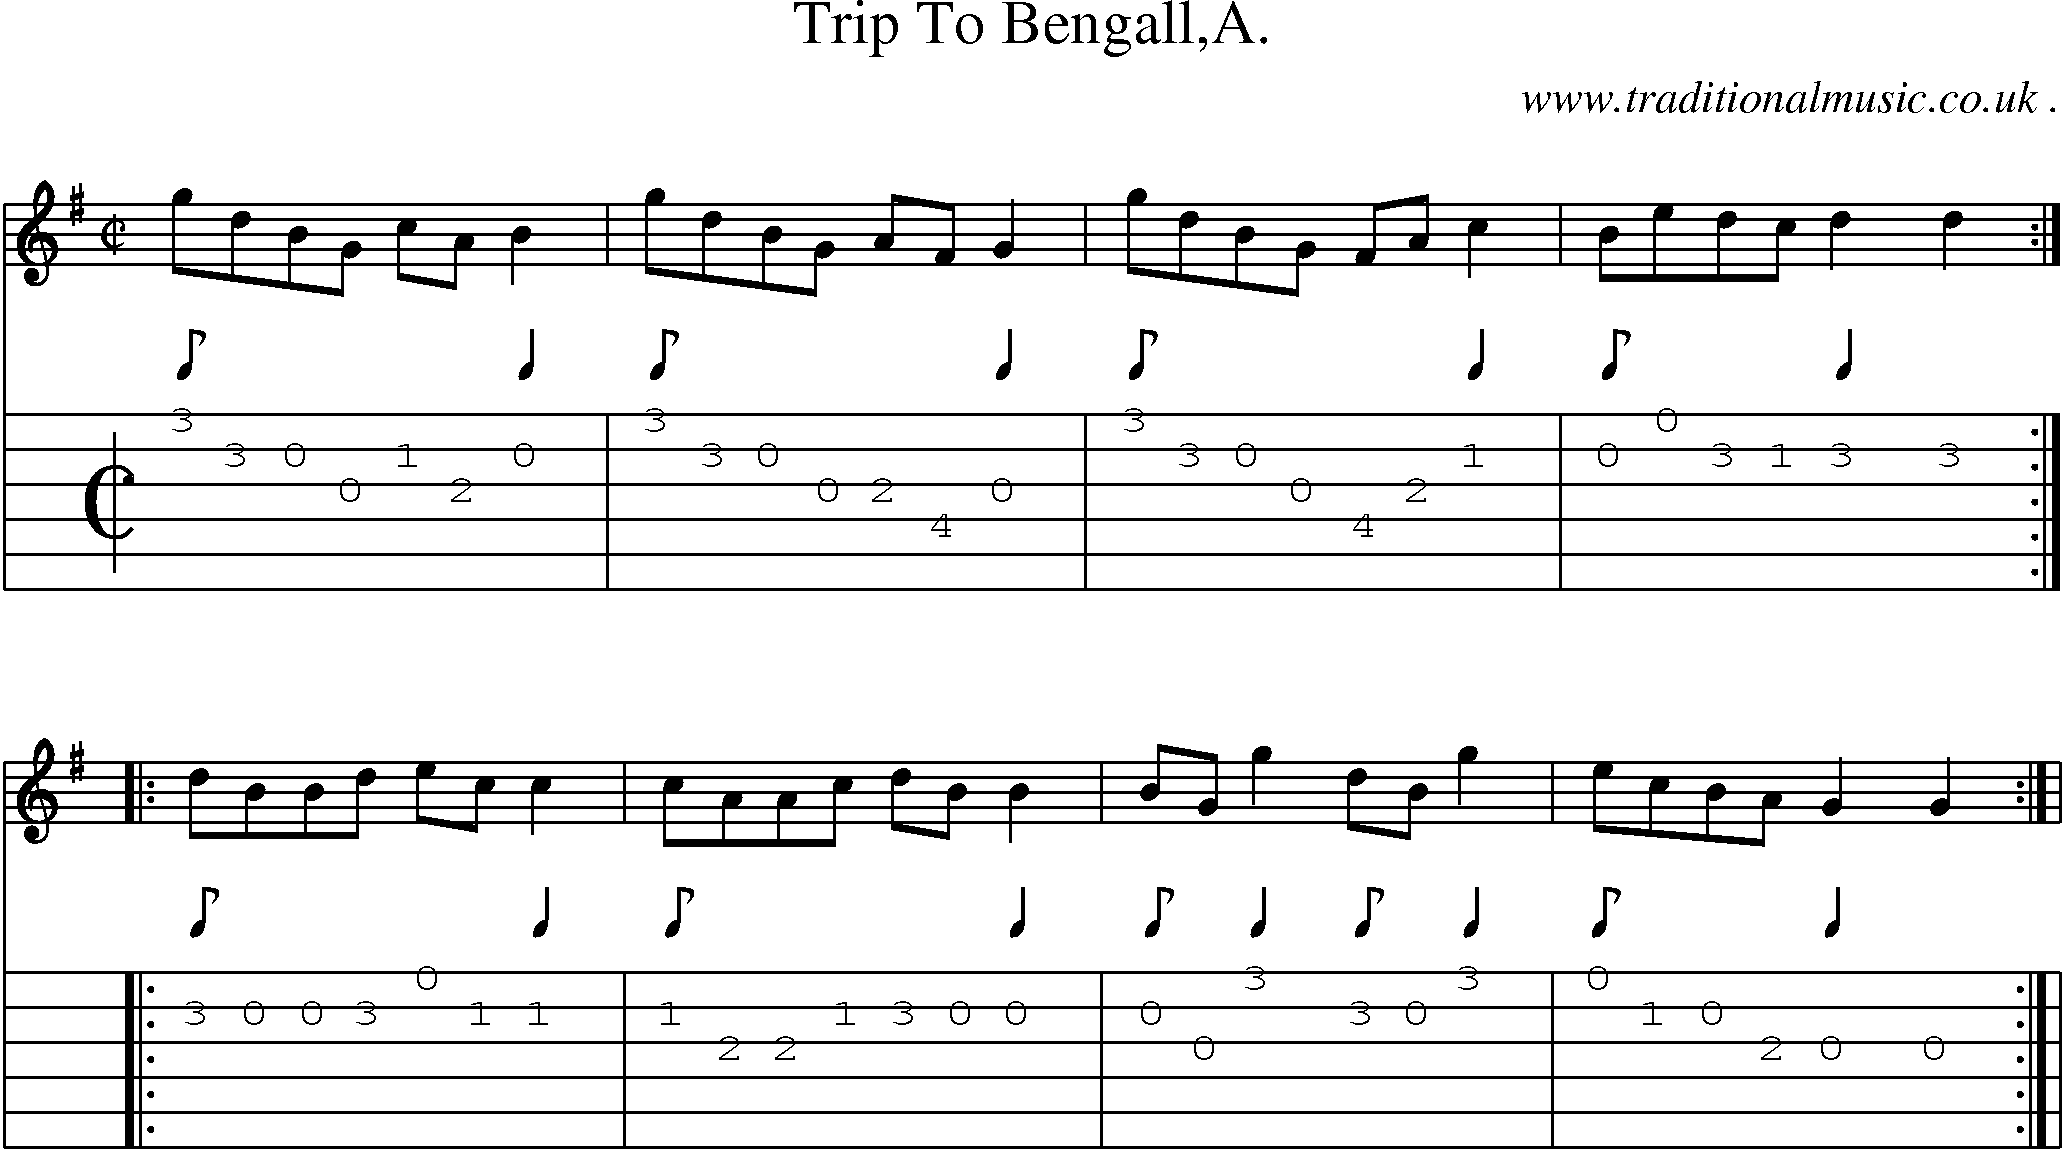 Sheet-Music and Guitar Tabs for Trip To Bengalla